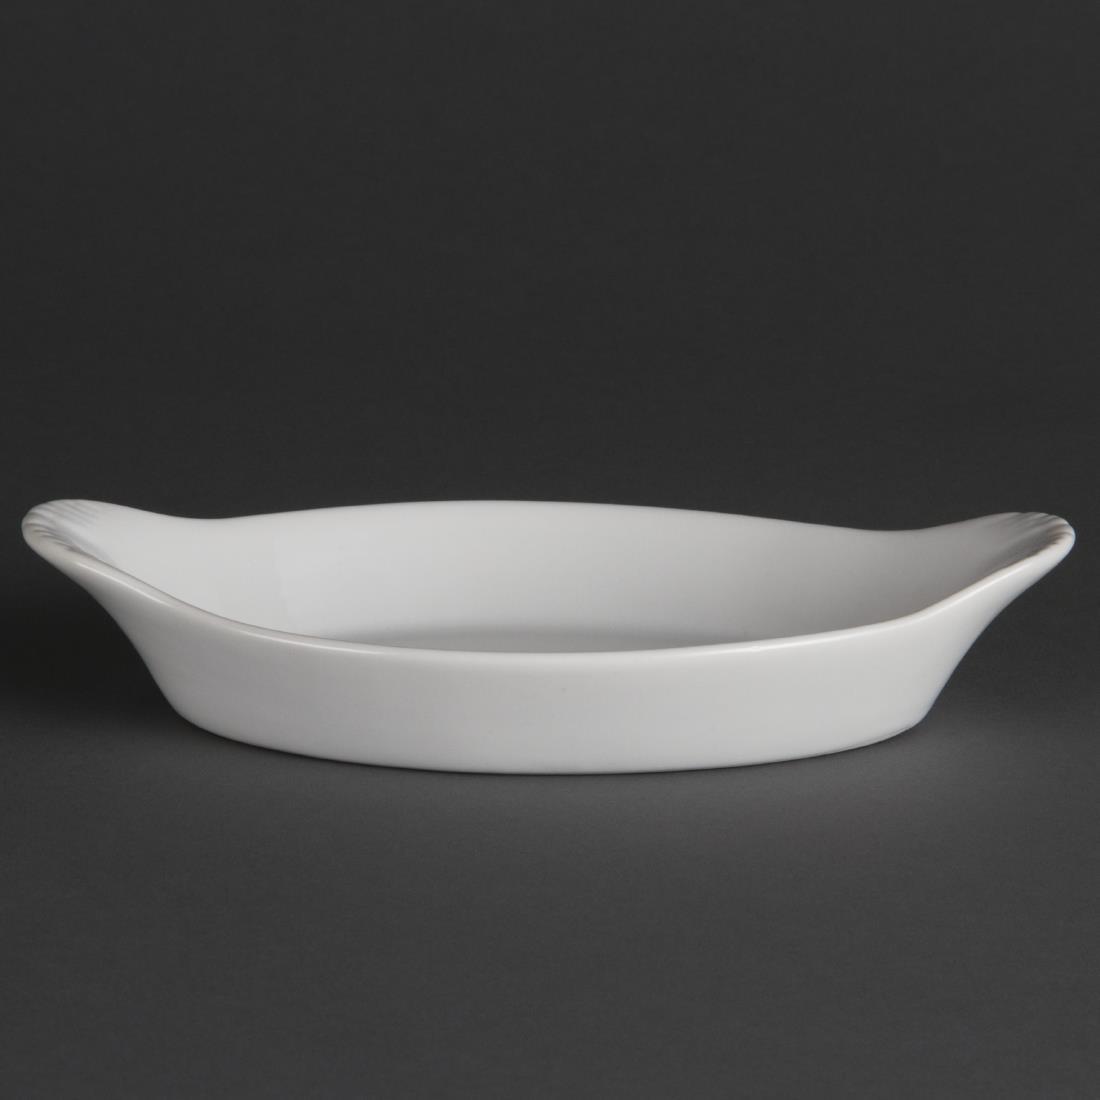 Olympia Whiteware Oval Eared Dishes 204mm (Pack of 6) - W441  - 2